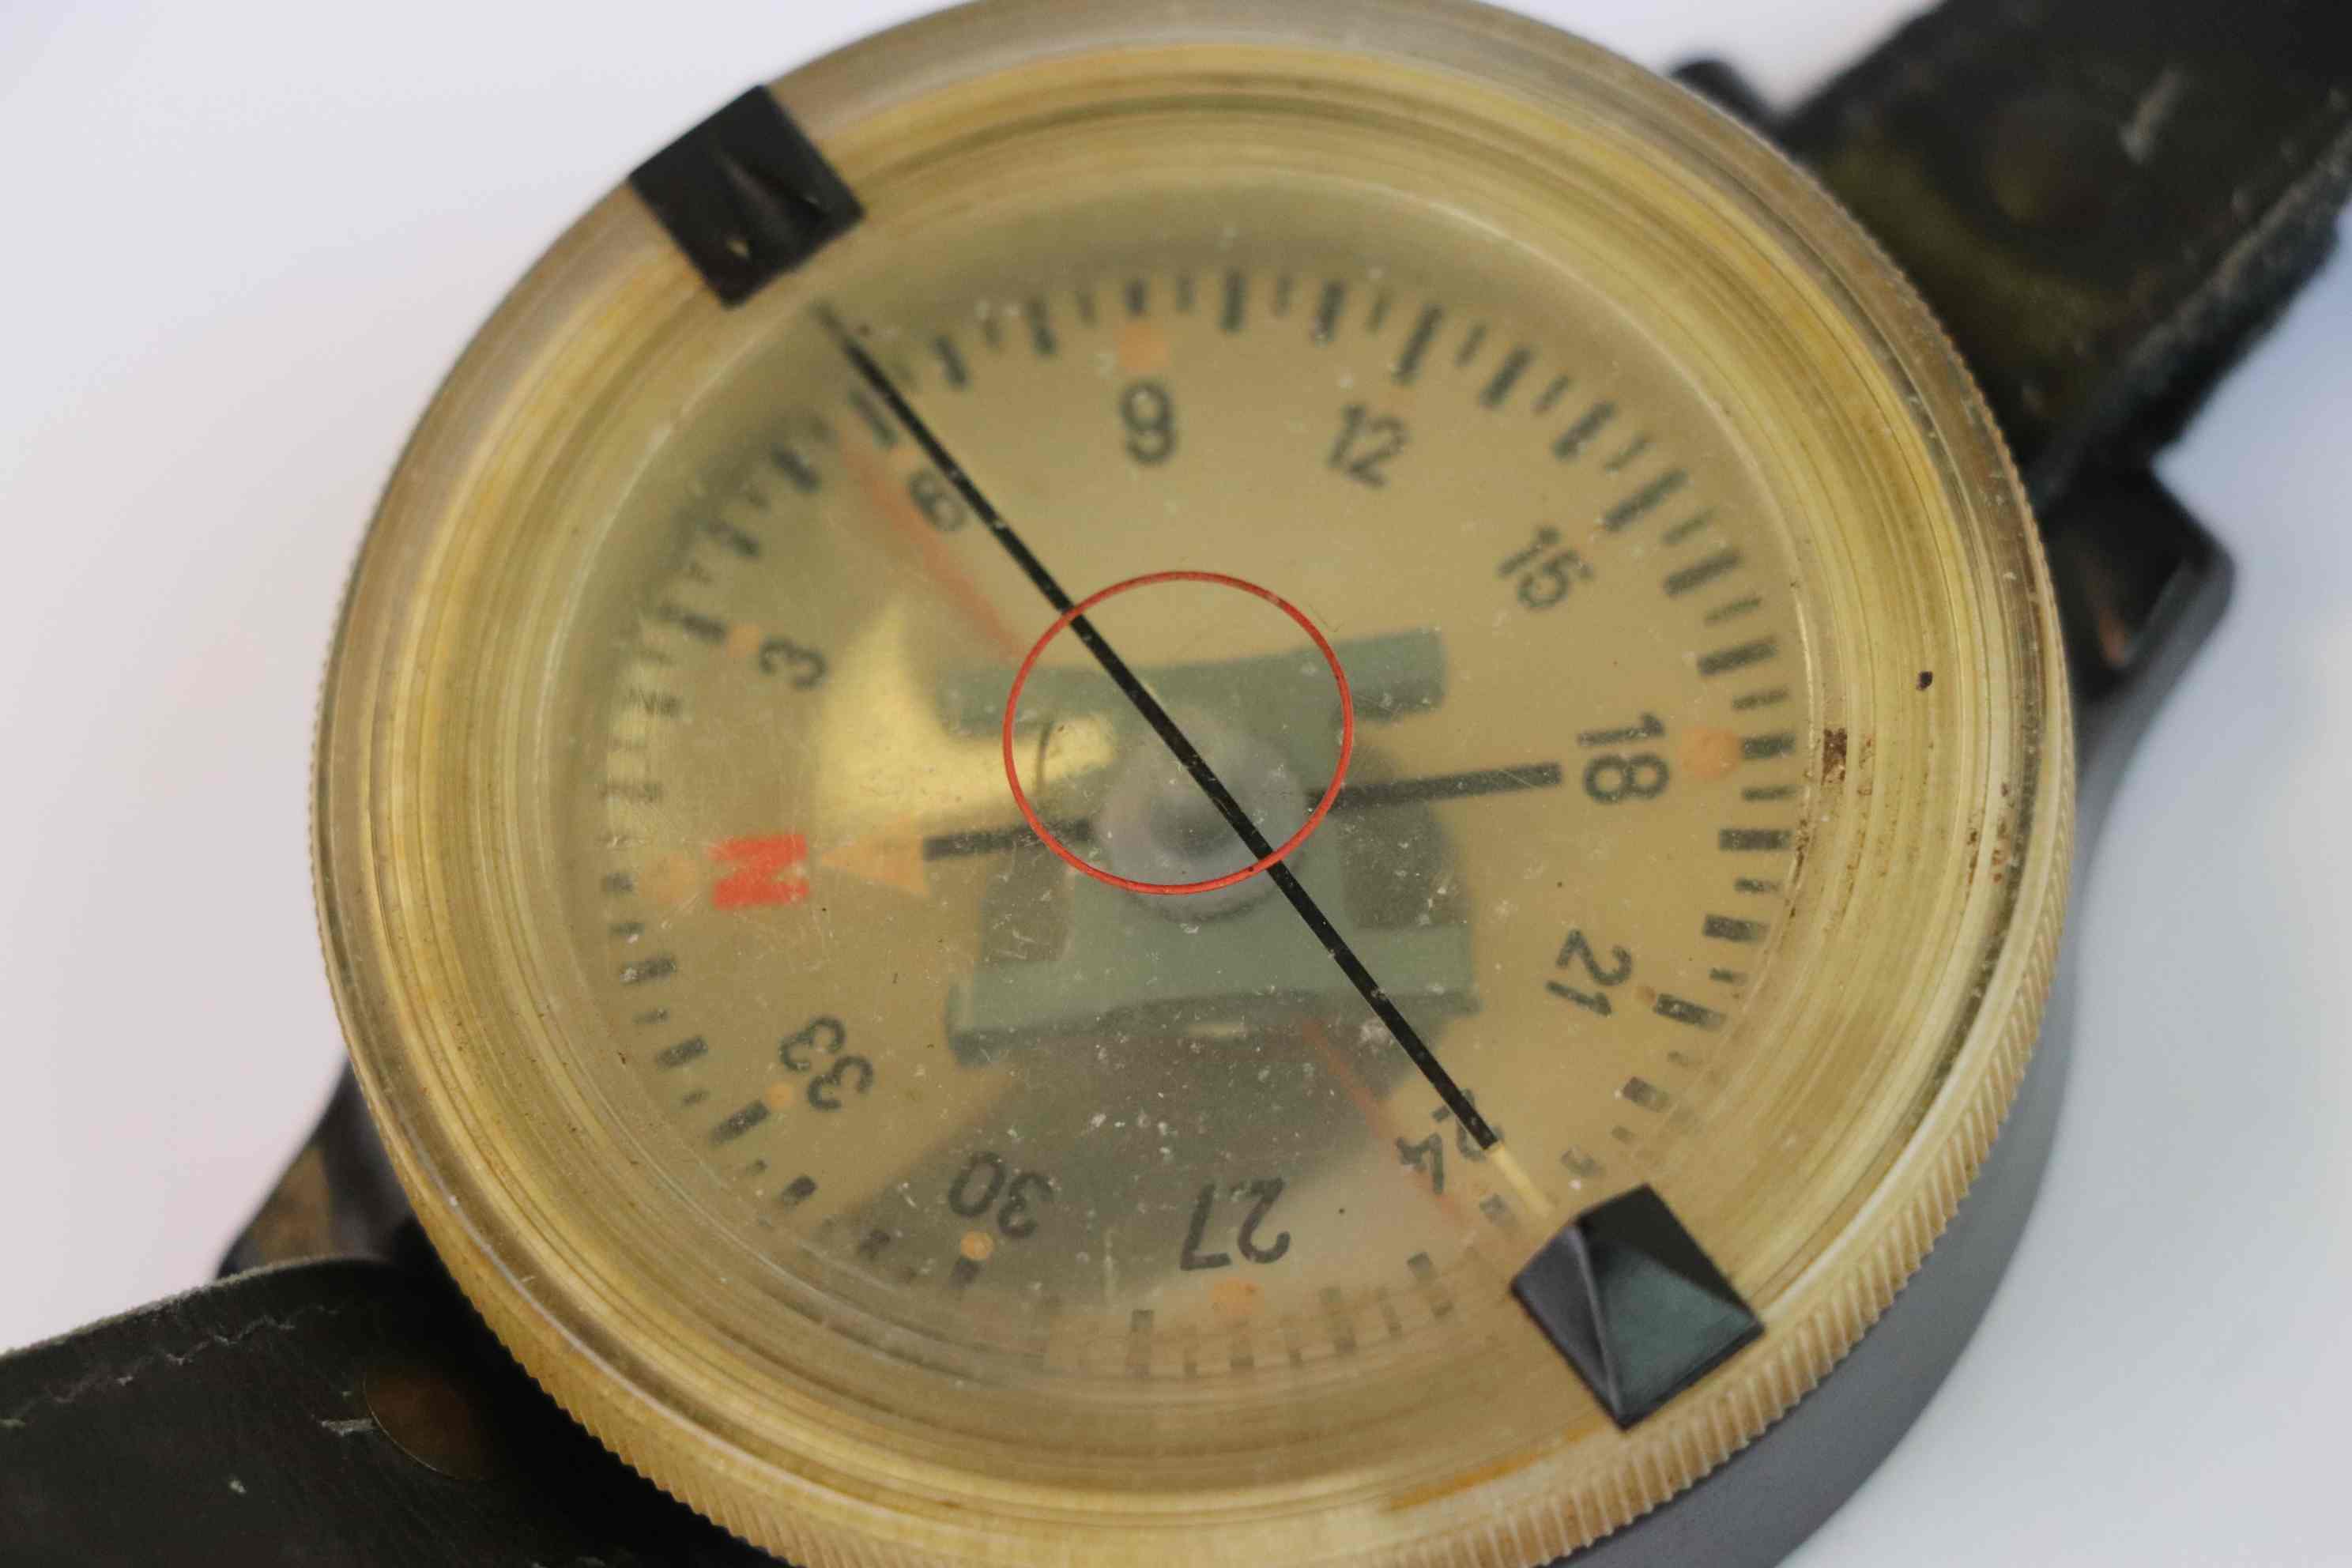 A WW2 German Luftwaffe Wrist Compass With Leather Strap, Markings To The Rear AK 39 FL 23235-1. - Image 4 of 6